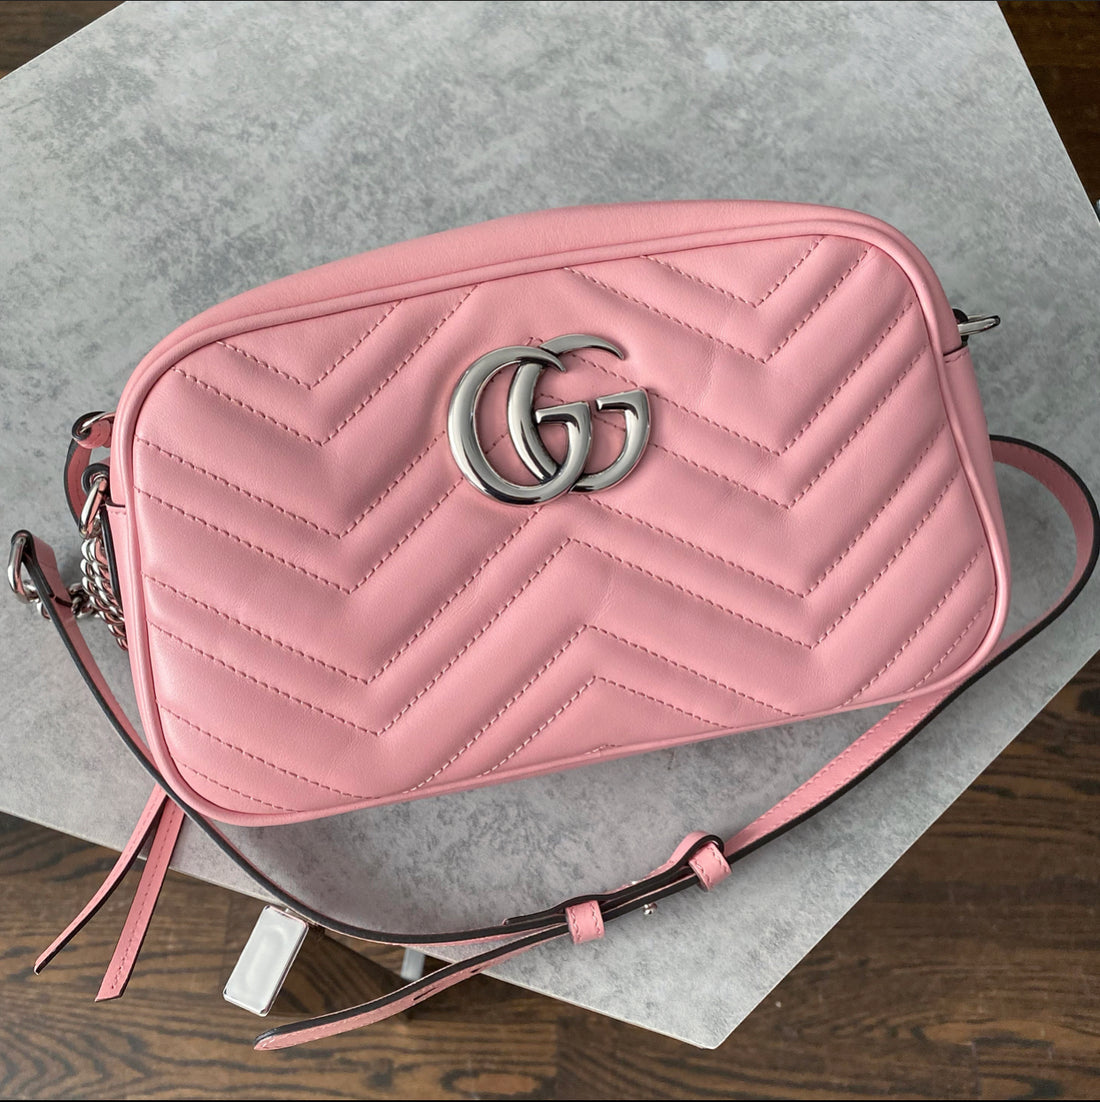 Gucci Light Pink Marmont Quilted Small Camera Bag